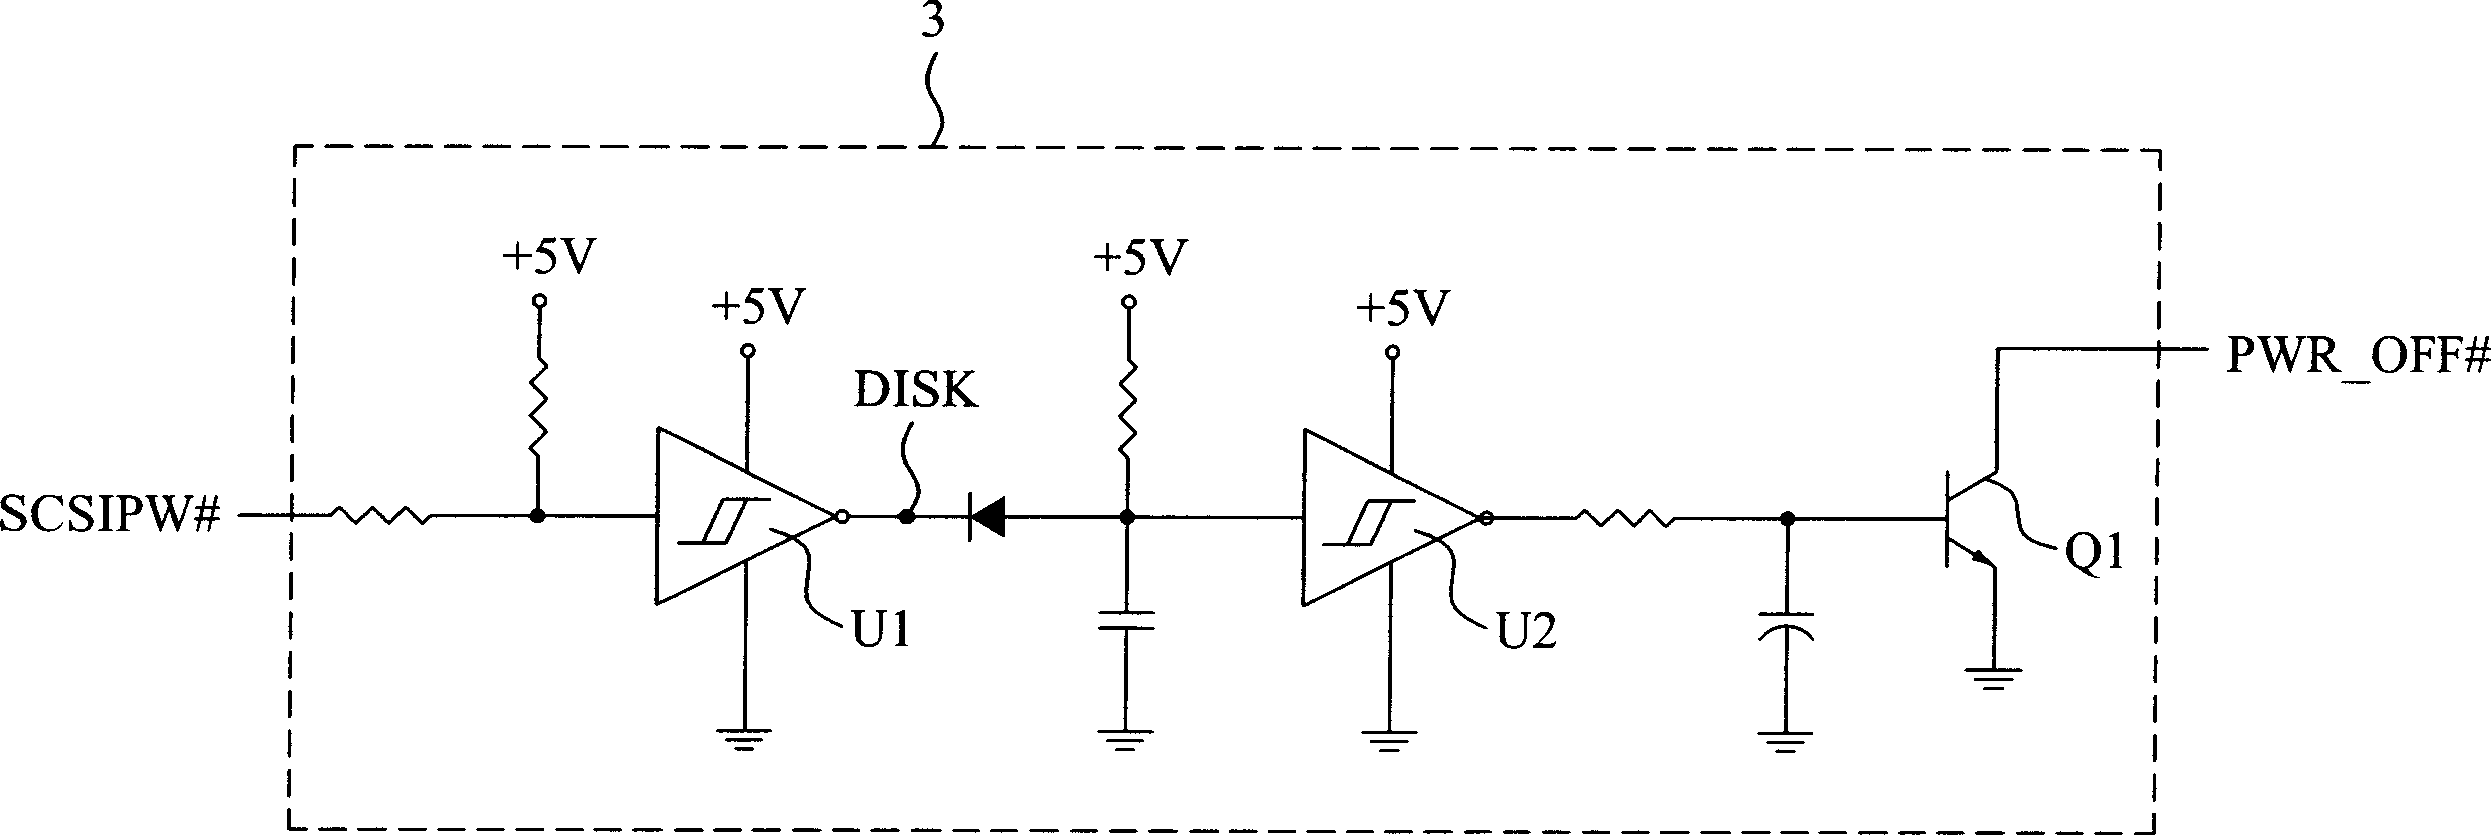 Hard disk hot Atach & Detach power supply protection circuit of computer device